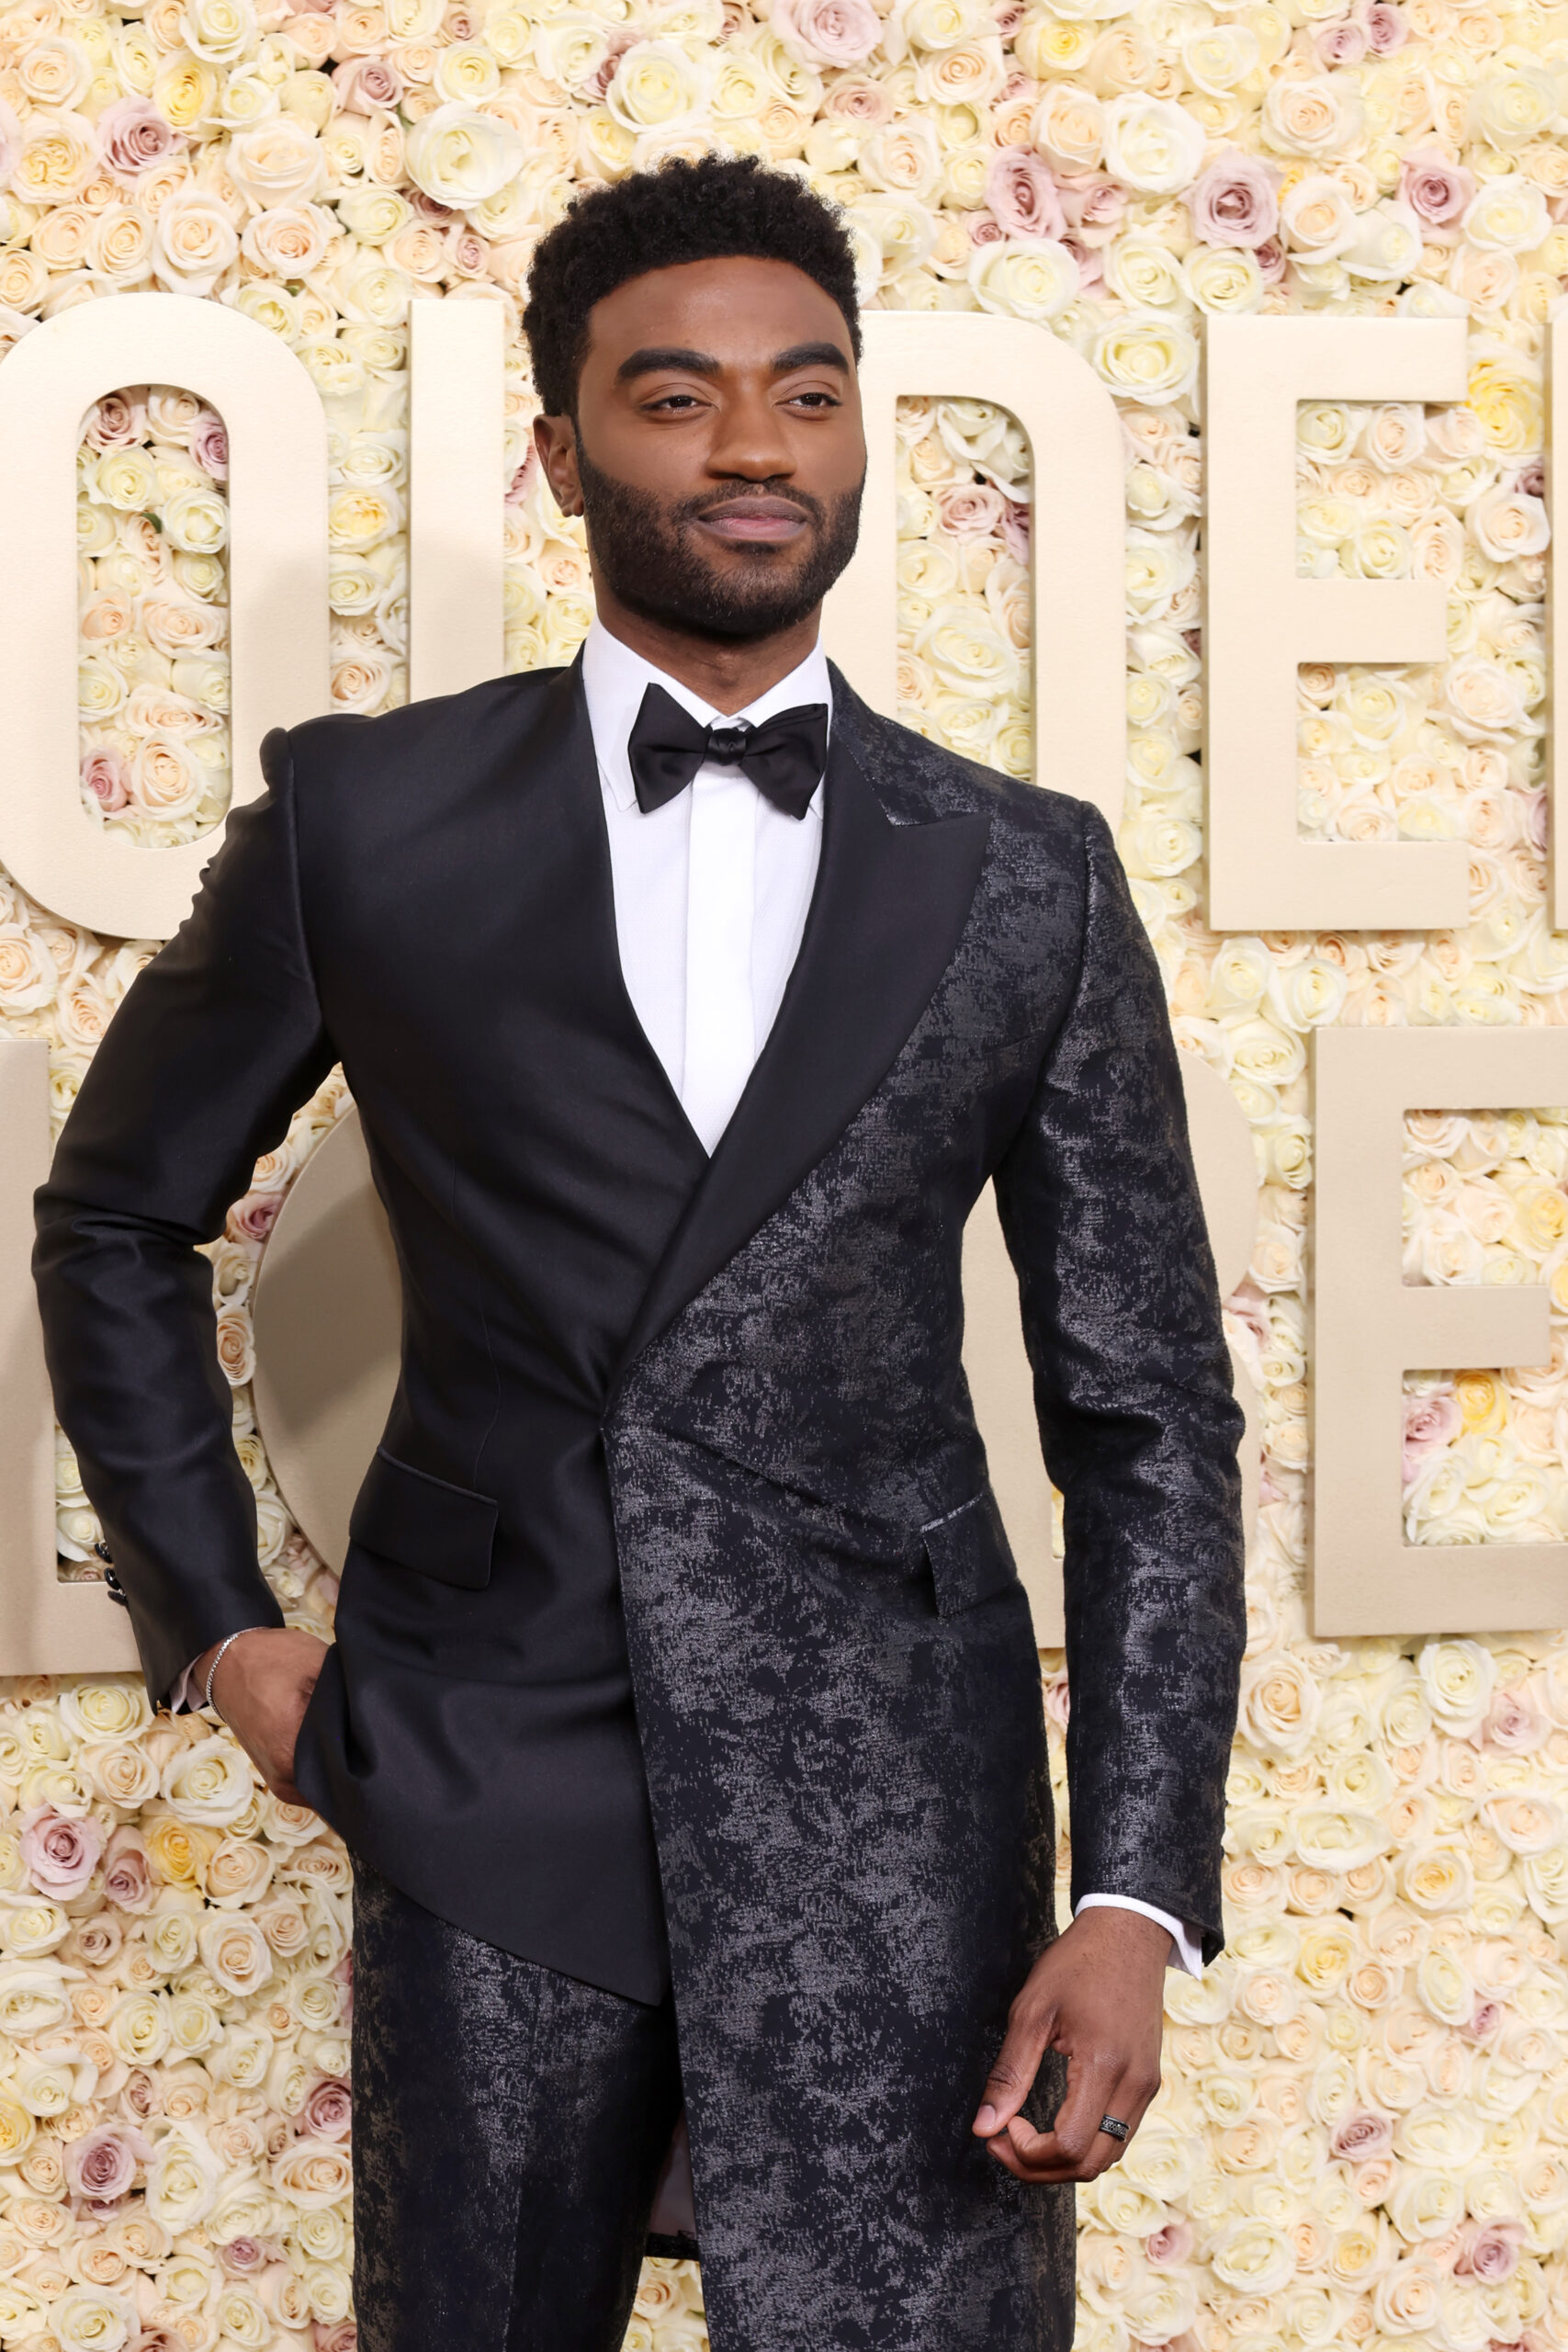 BEVERLY HILLS, CALIFORNIA - JANUARY 07: Jelani Alladin attends the 81st Annual Golden Globe Awards at The Beverly Hilton on January 07, 2024 in Beverly Hills, California. (Photo by Amy Sussman/Getty Images)